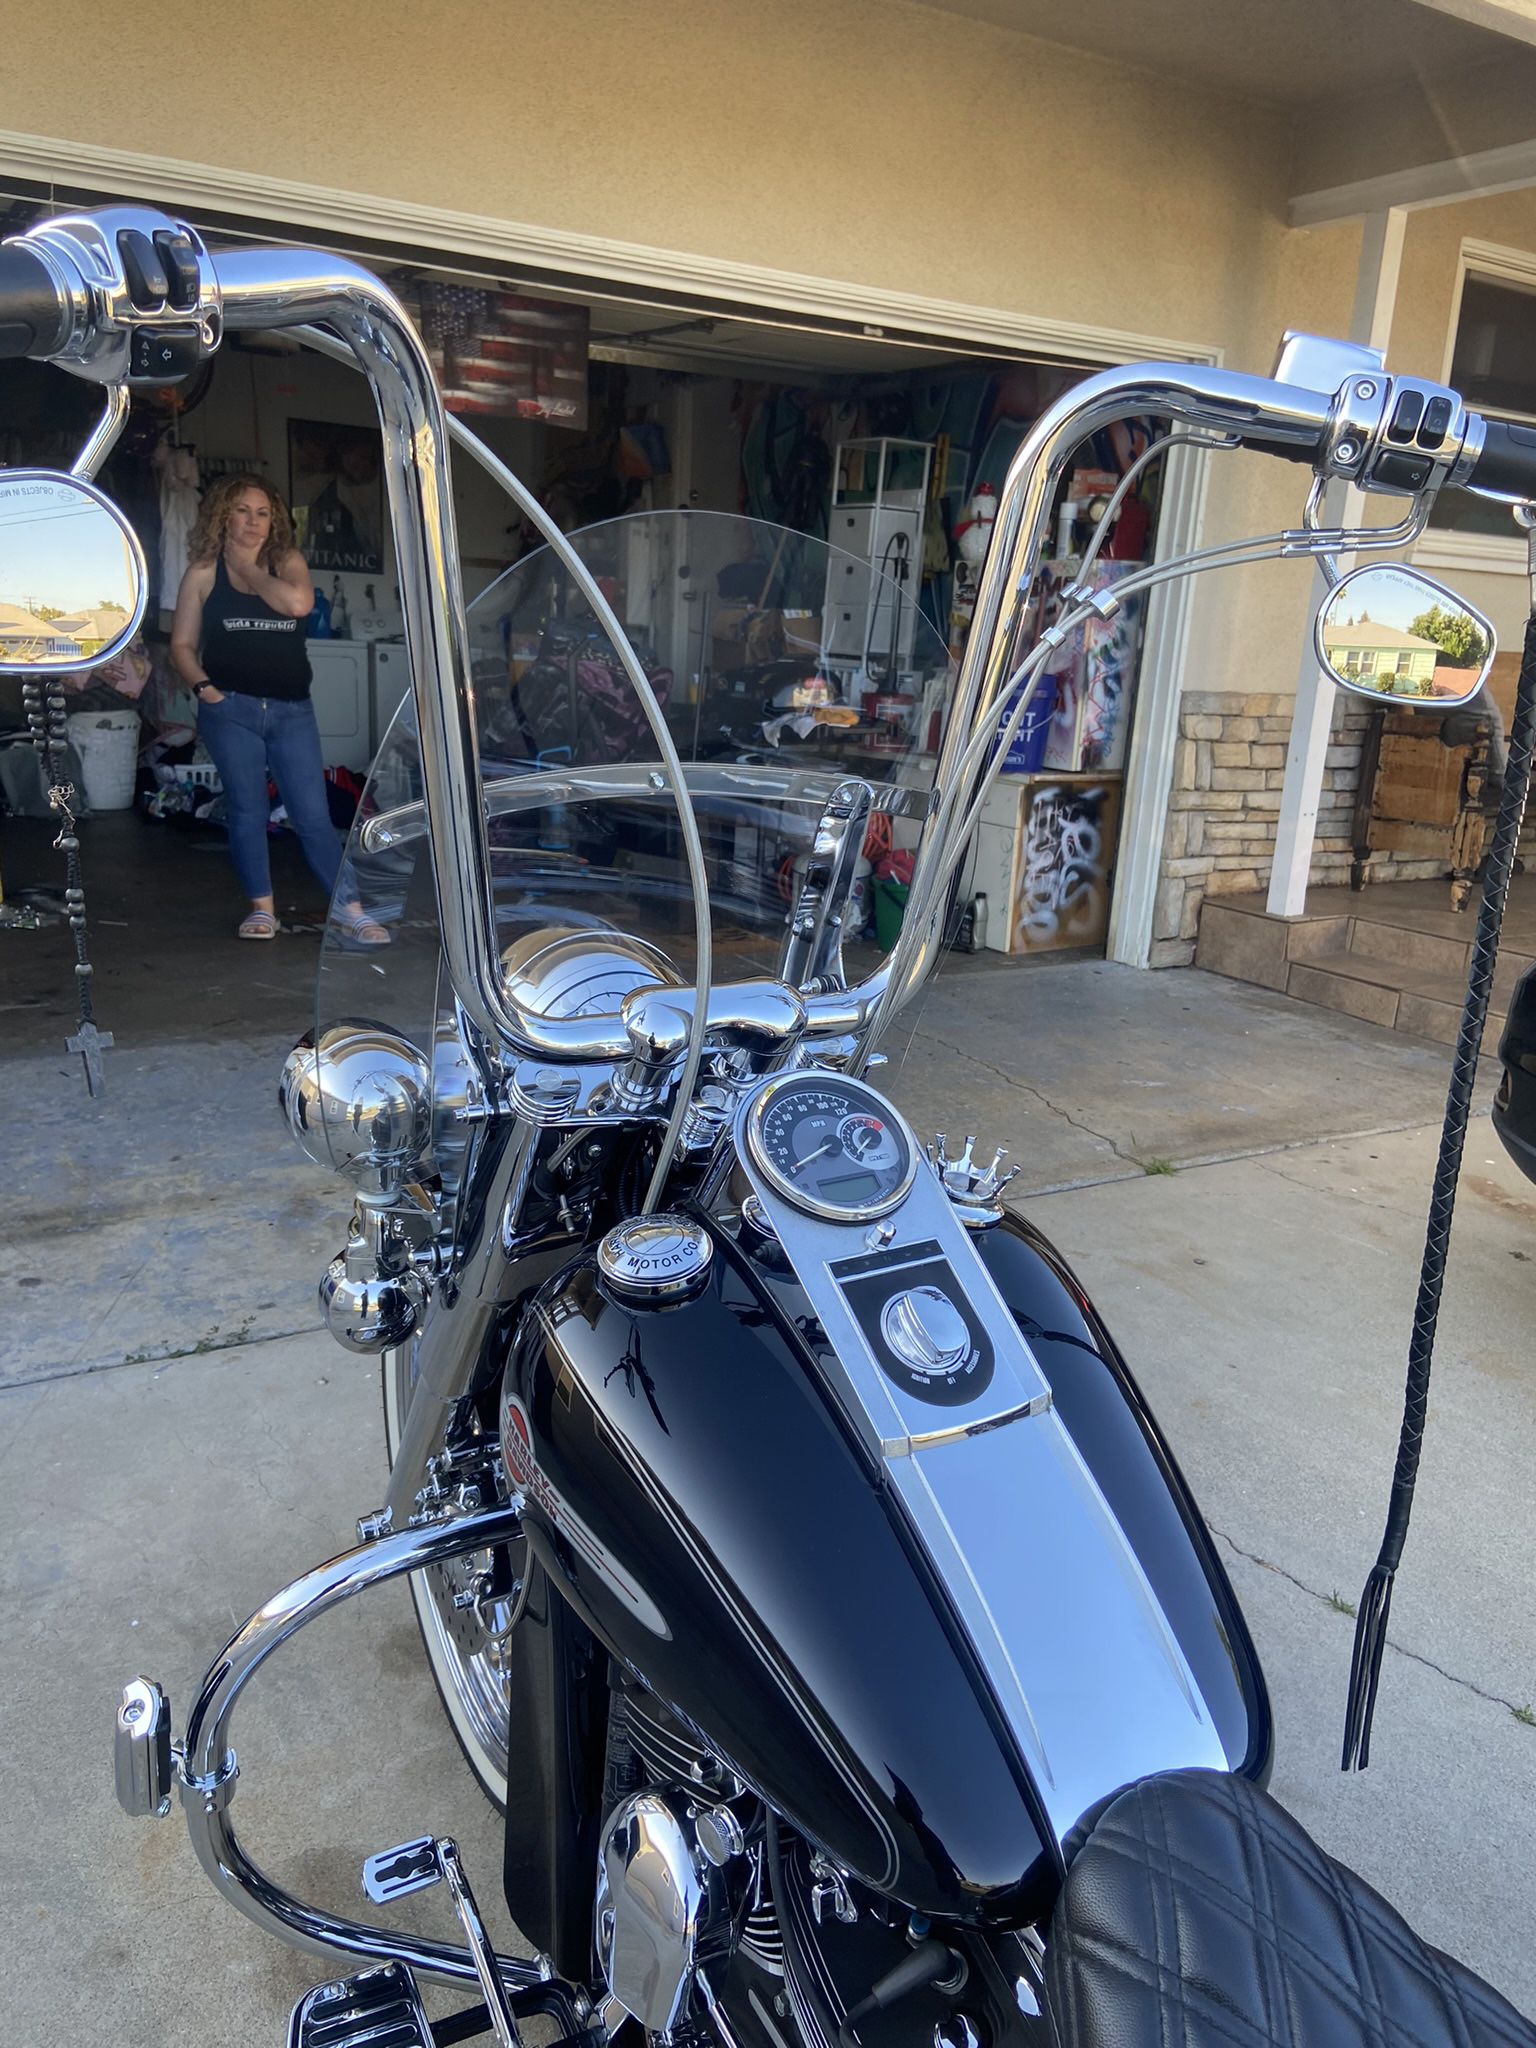 Brumate Era HAPPY HOUR Limited Edition for Sale in Tulare, CA - OfferUp